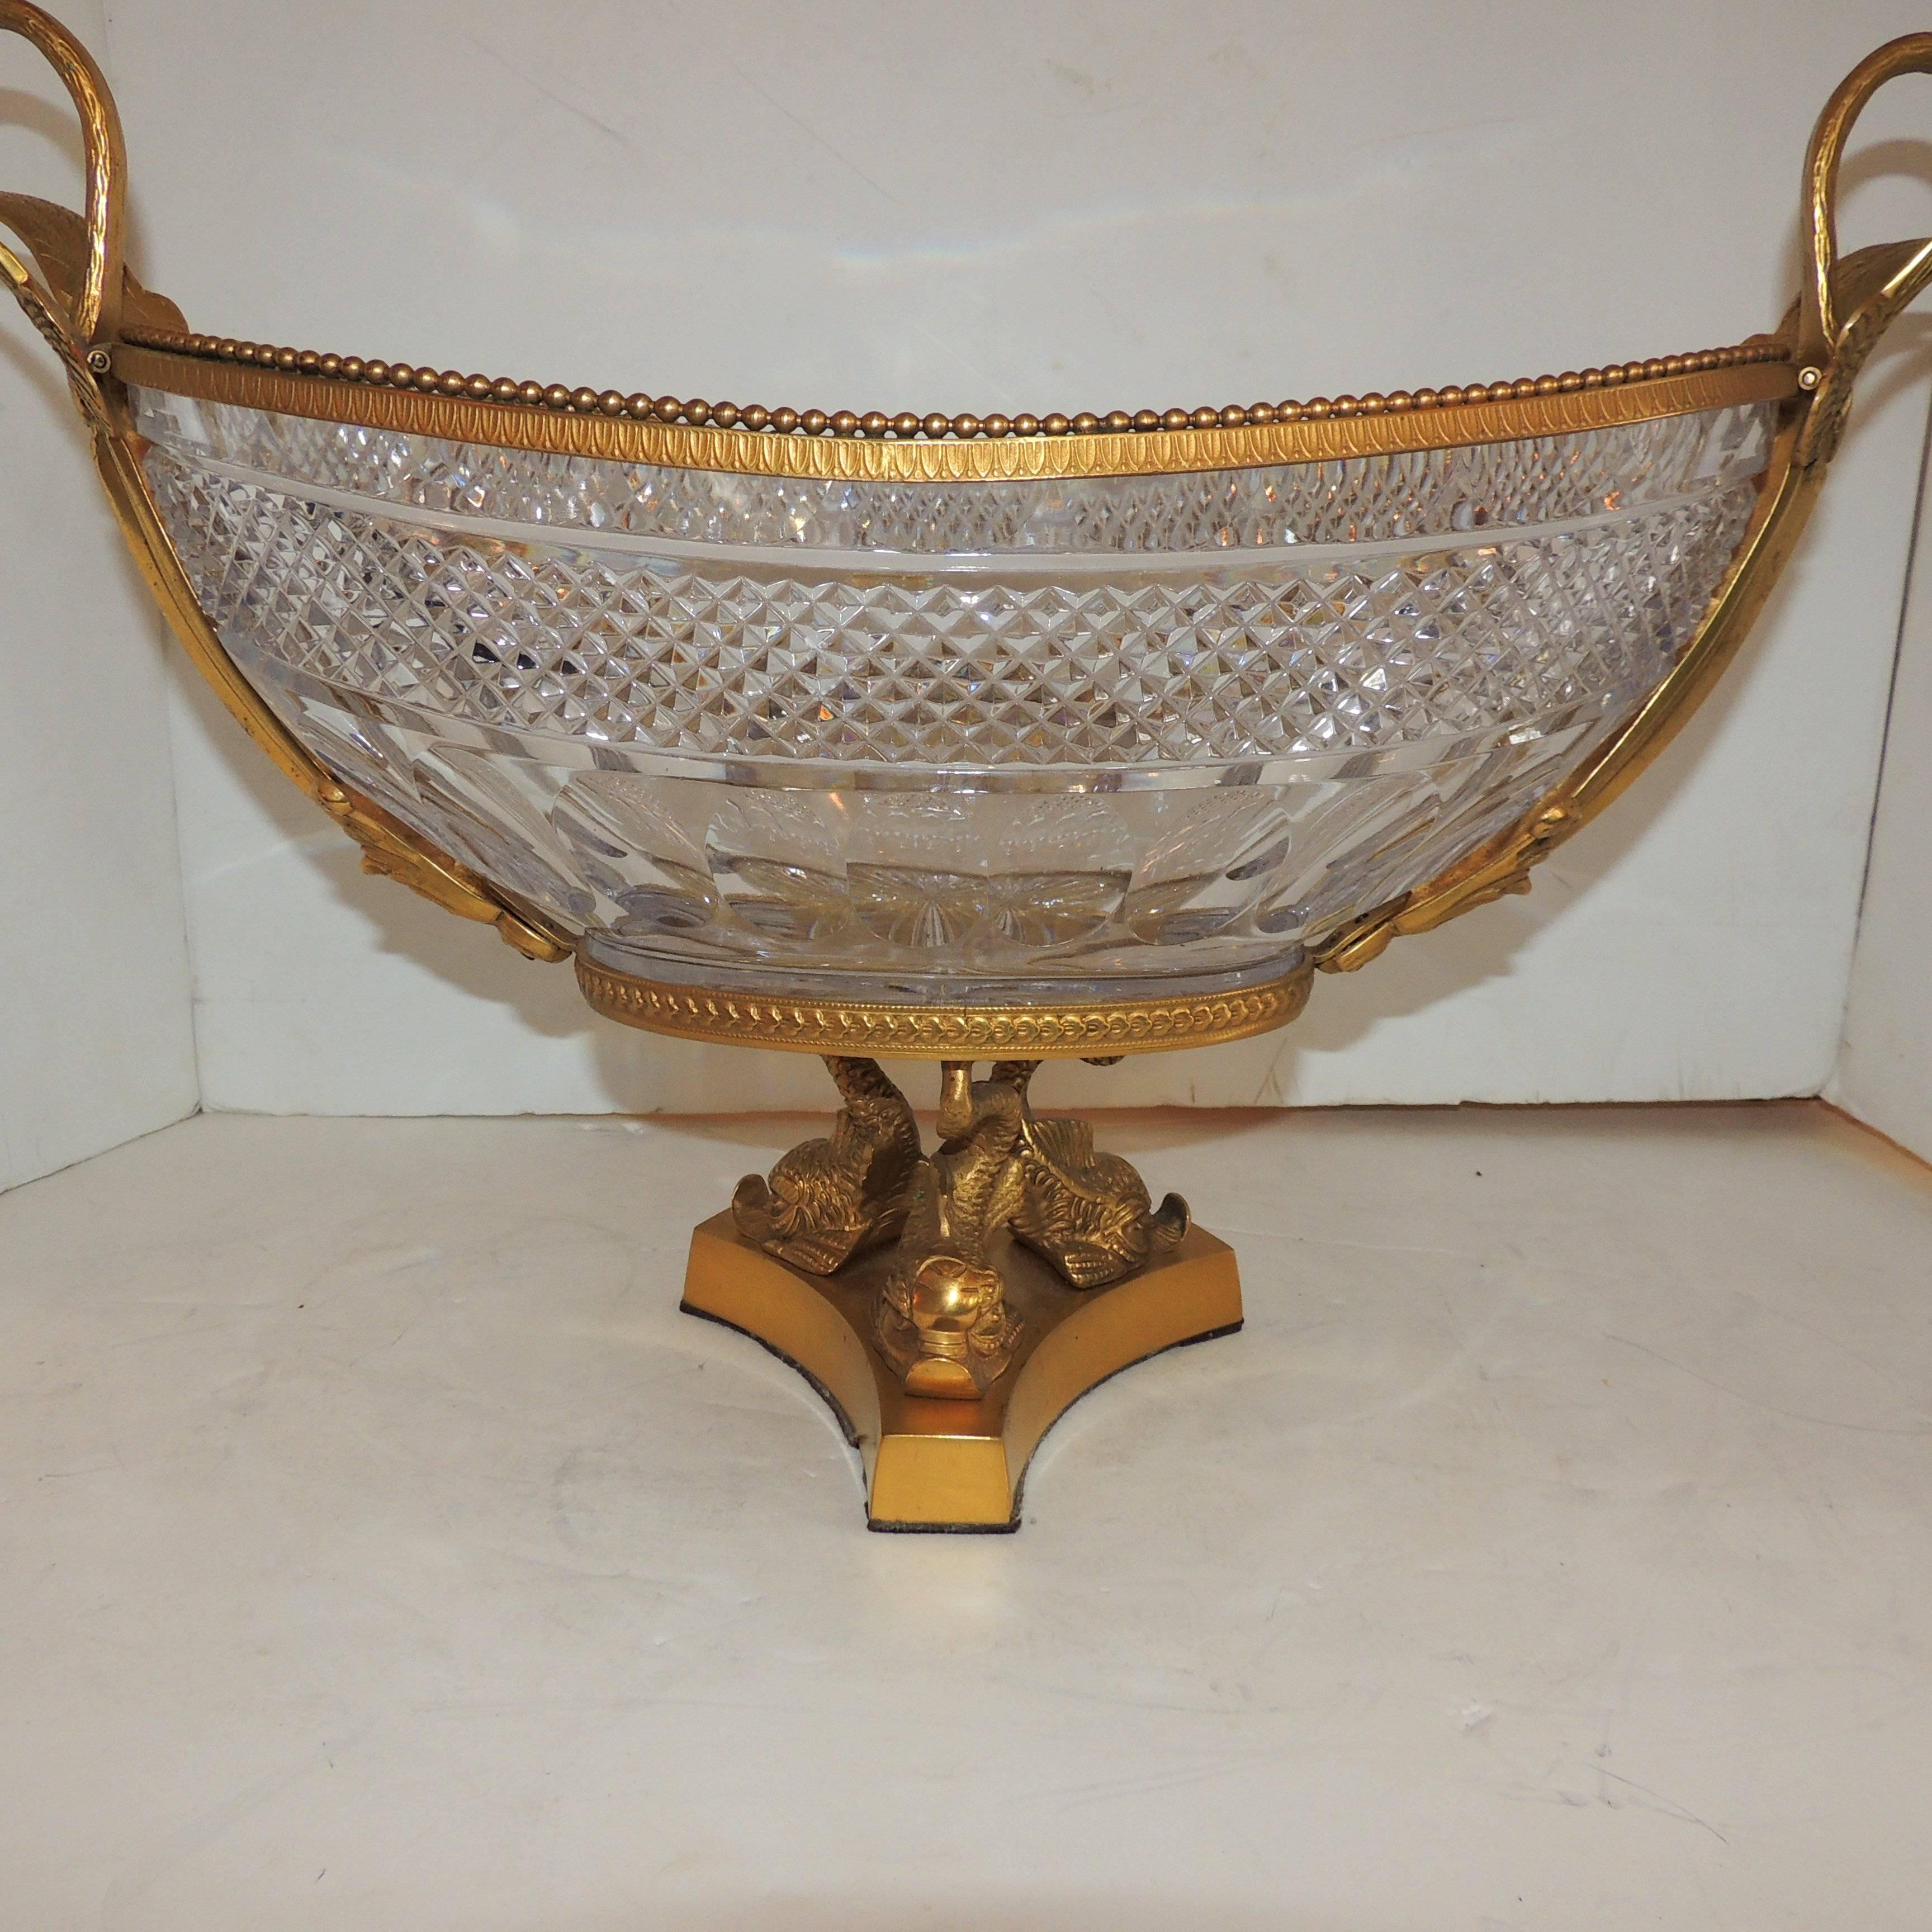 A wonderful French neoclassical dore´ bronze centerpiece with three dolphins on the pedestal and two lovely swans in flight on each side. The diamond cut crystal insert with star burst bottom add to the elegance of this impressive